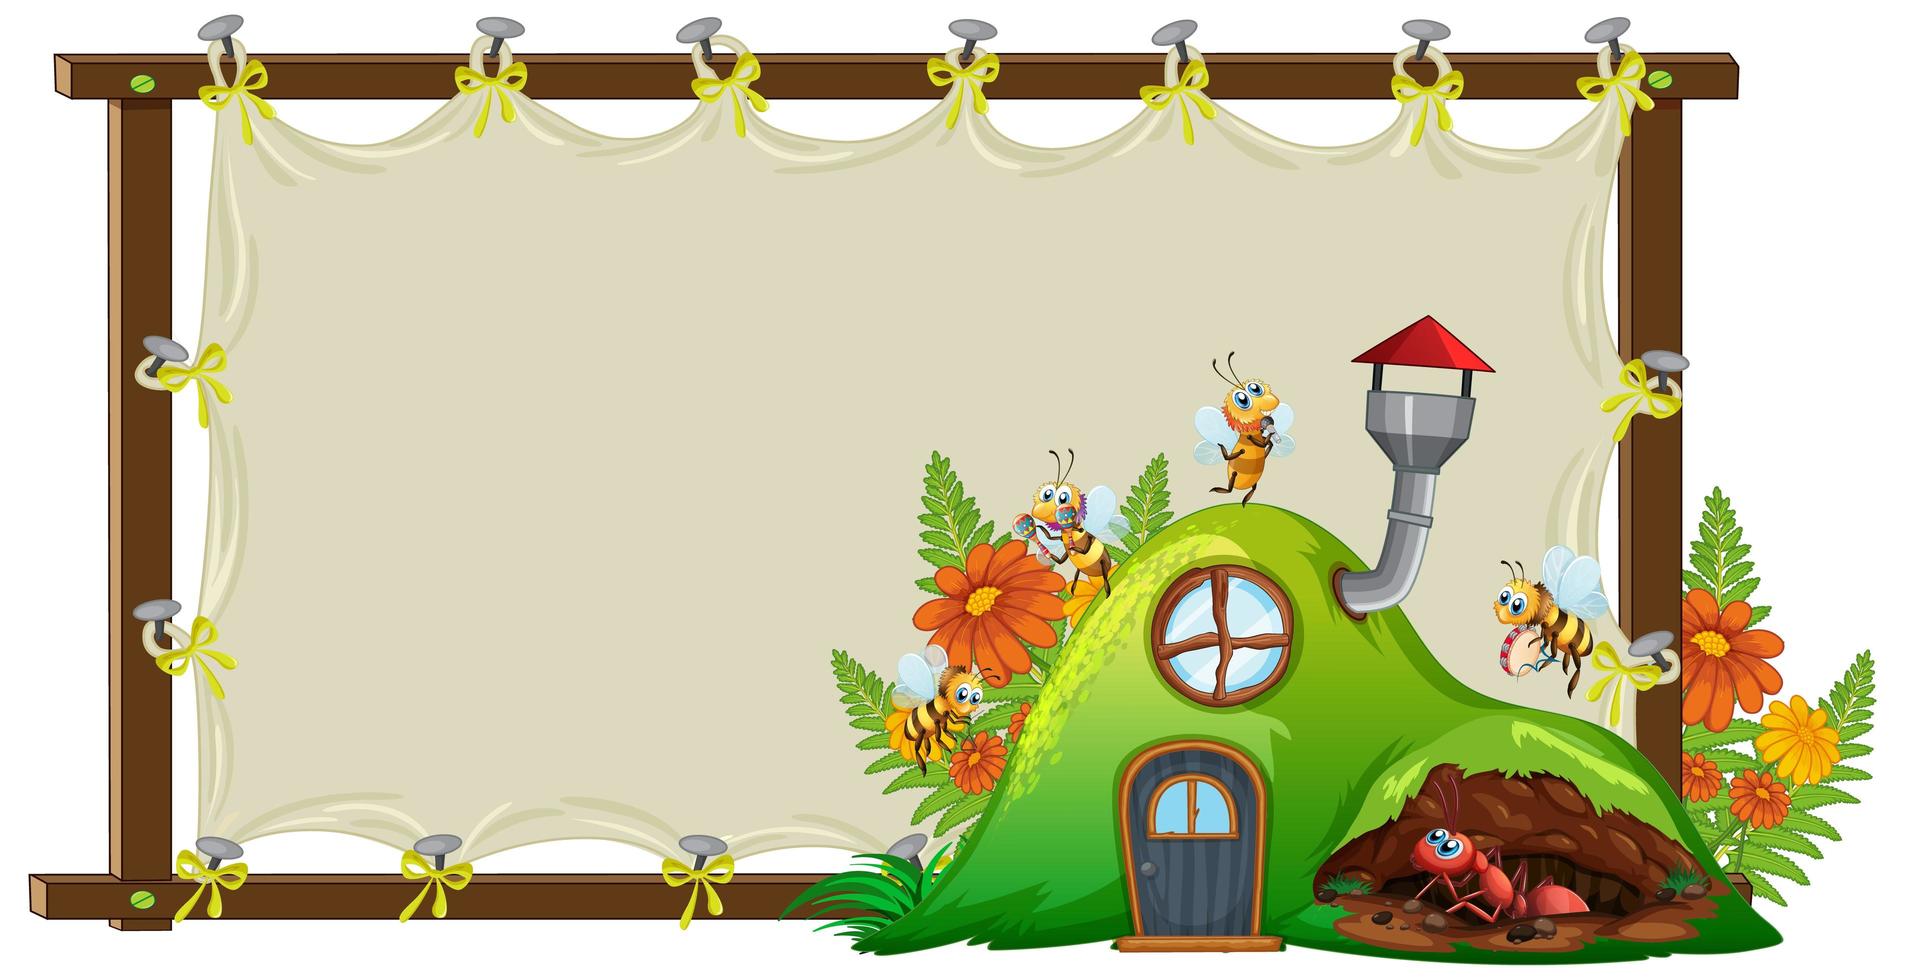 Border template design with insects in the garden vector